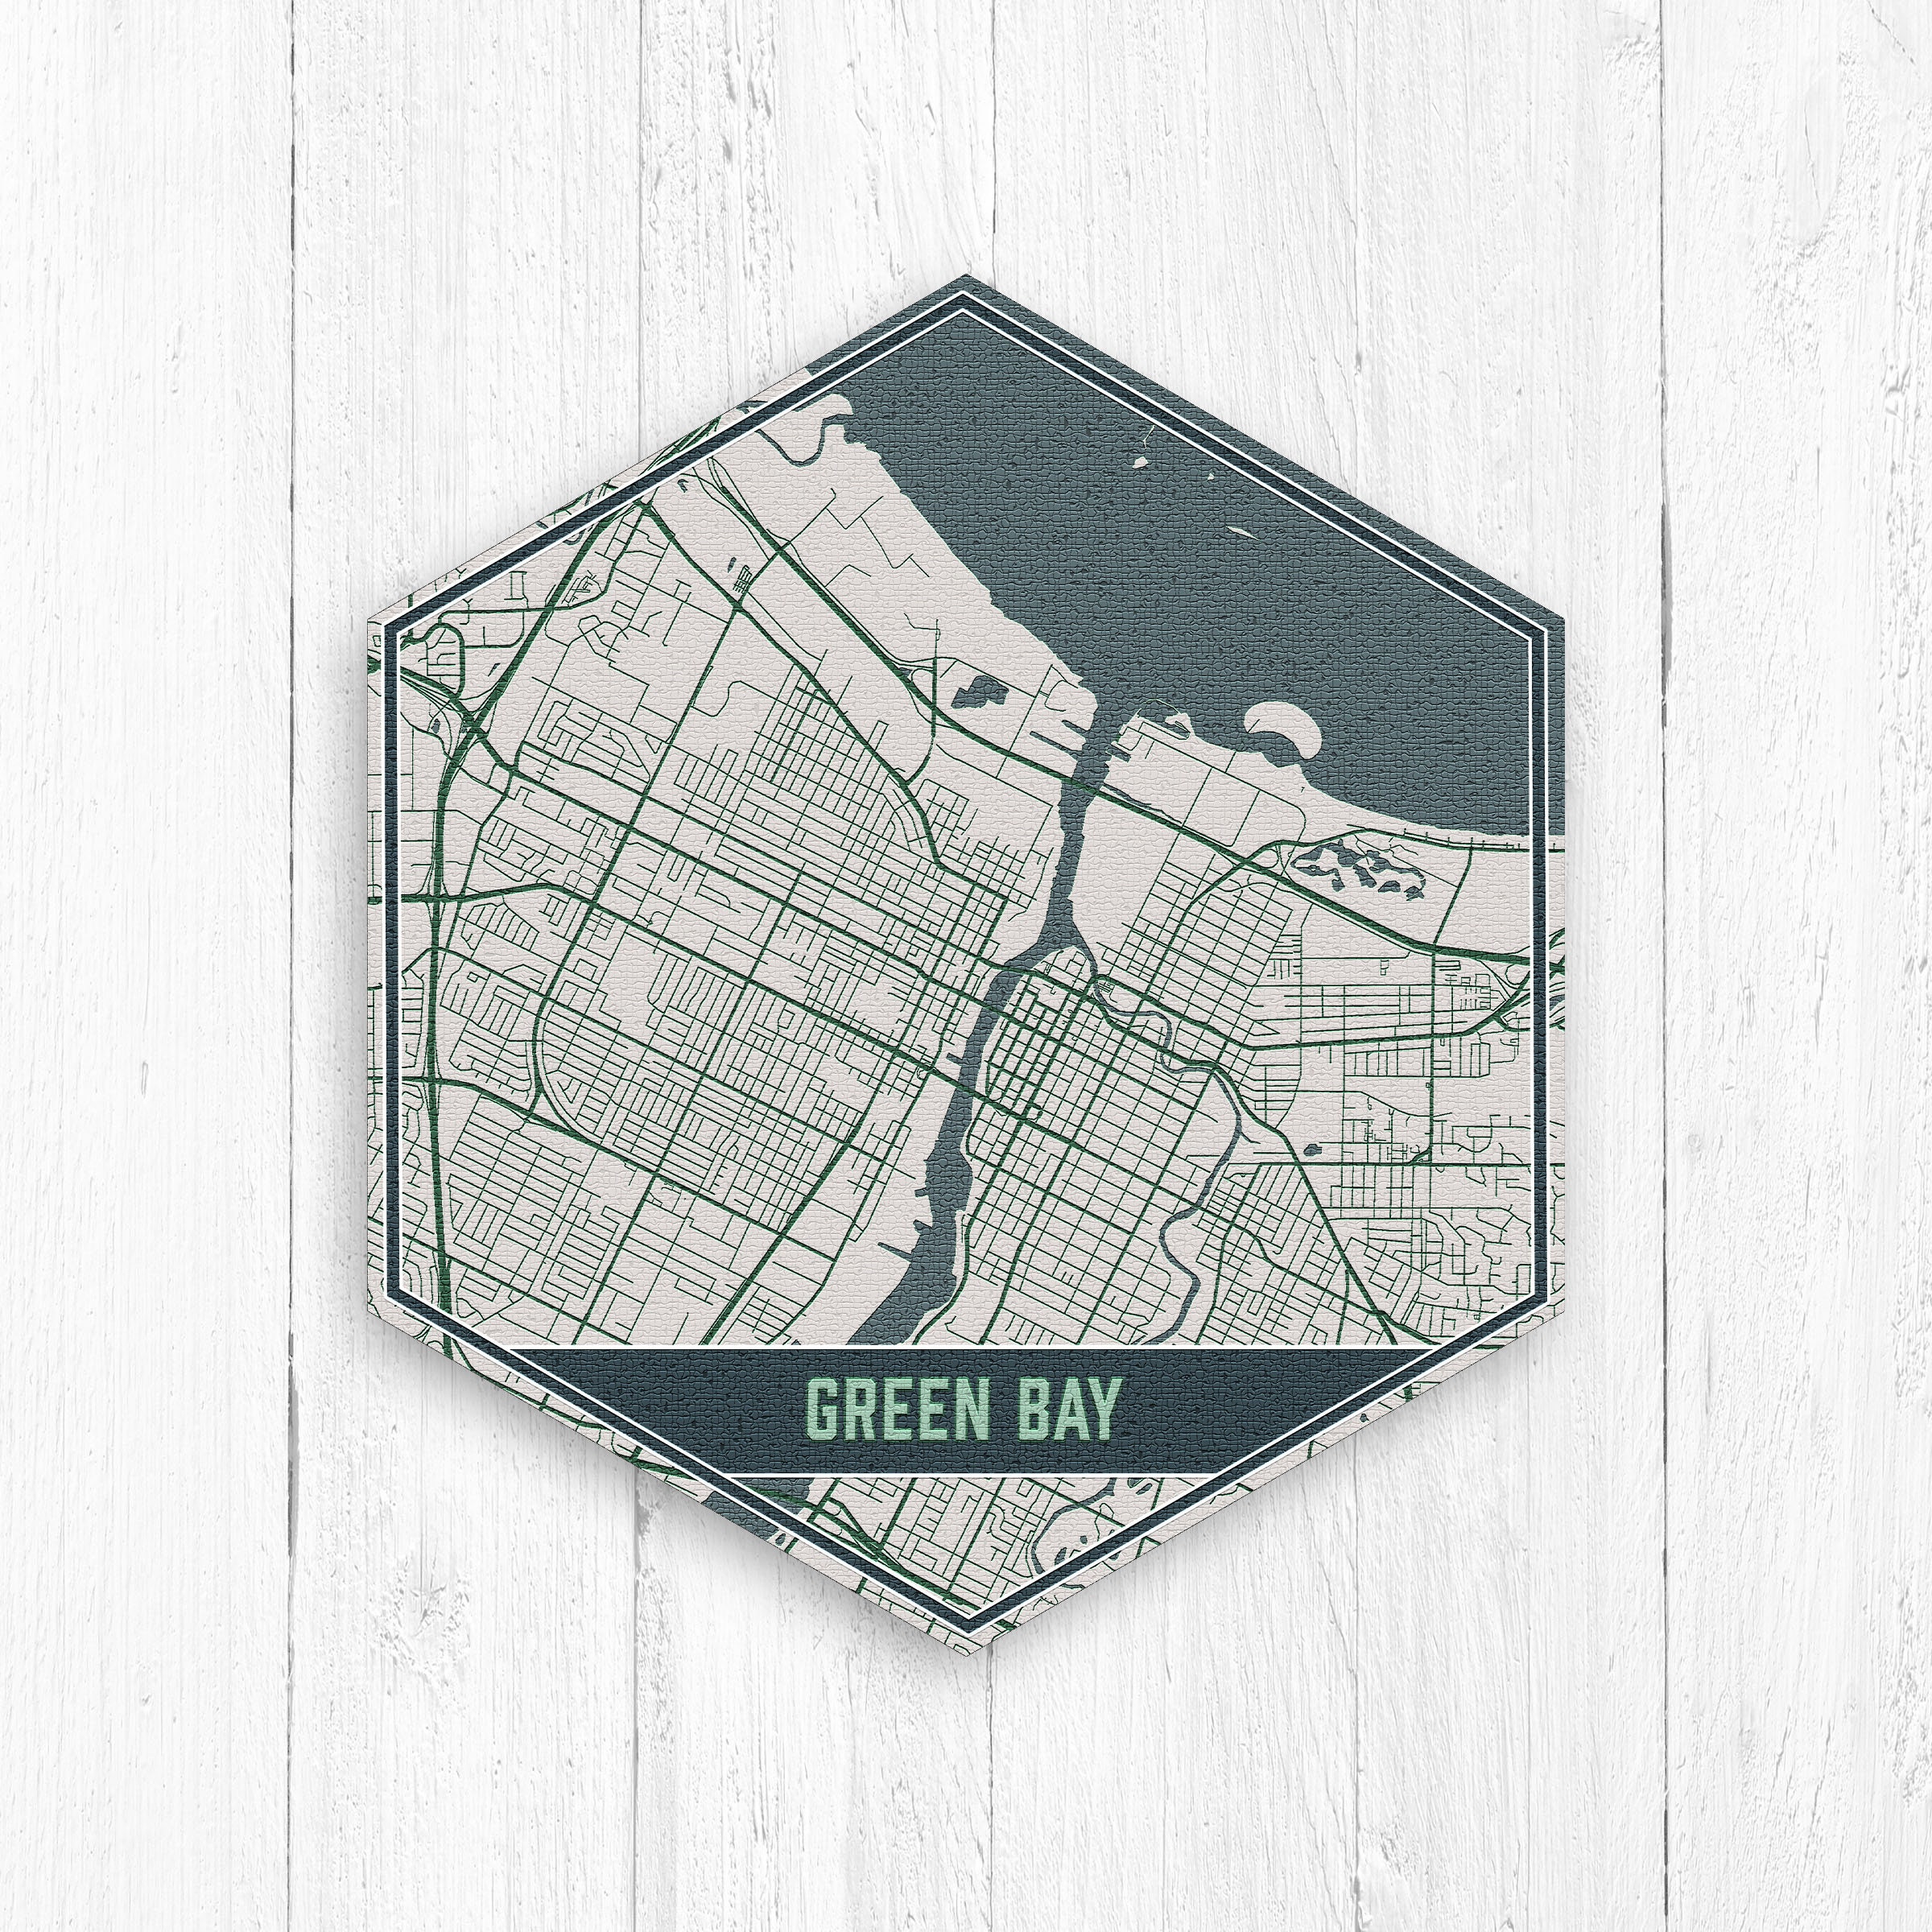 Green Bay Wisconsin Hexagon Street Map By Printed Marketplace